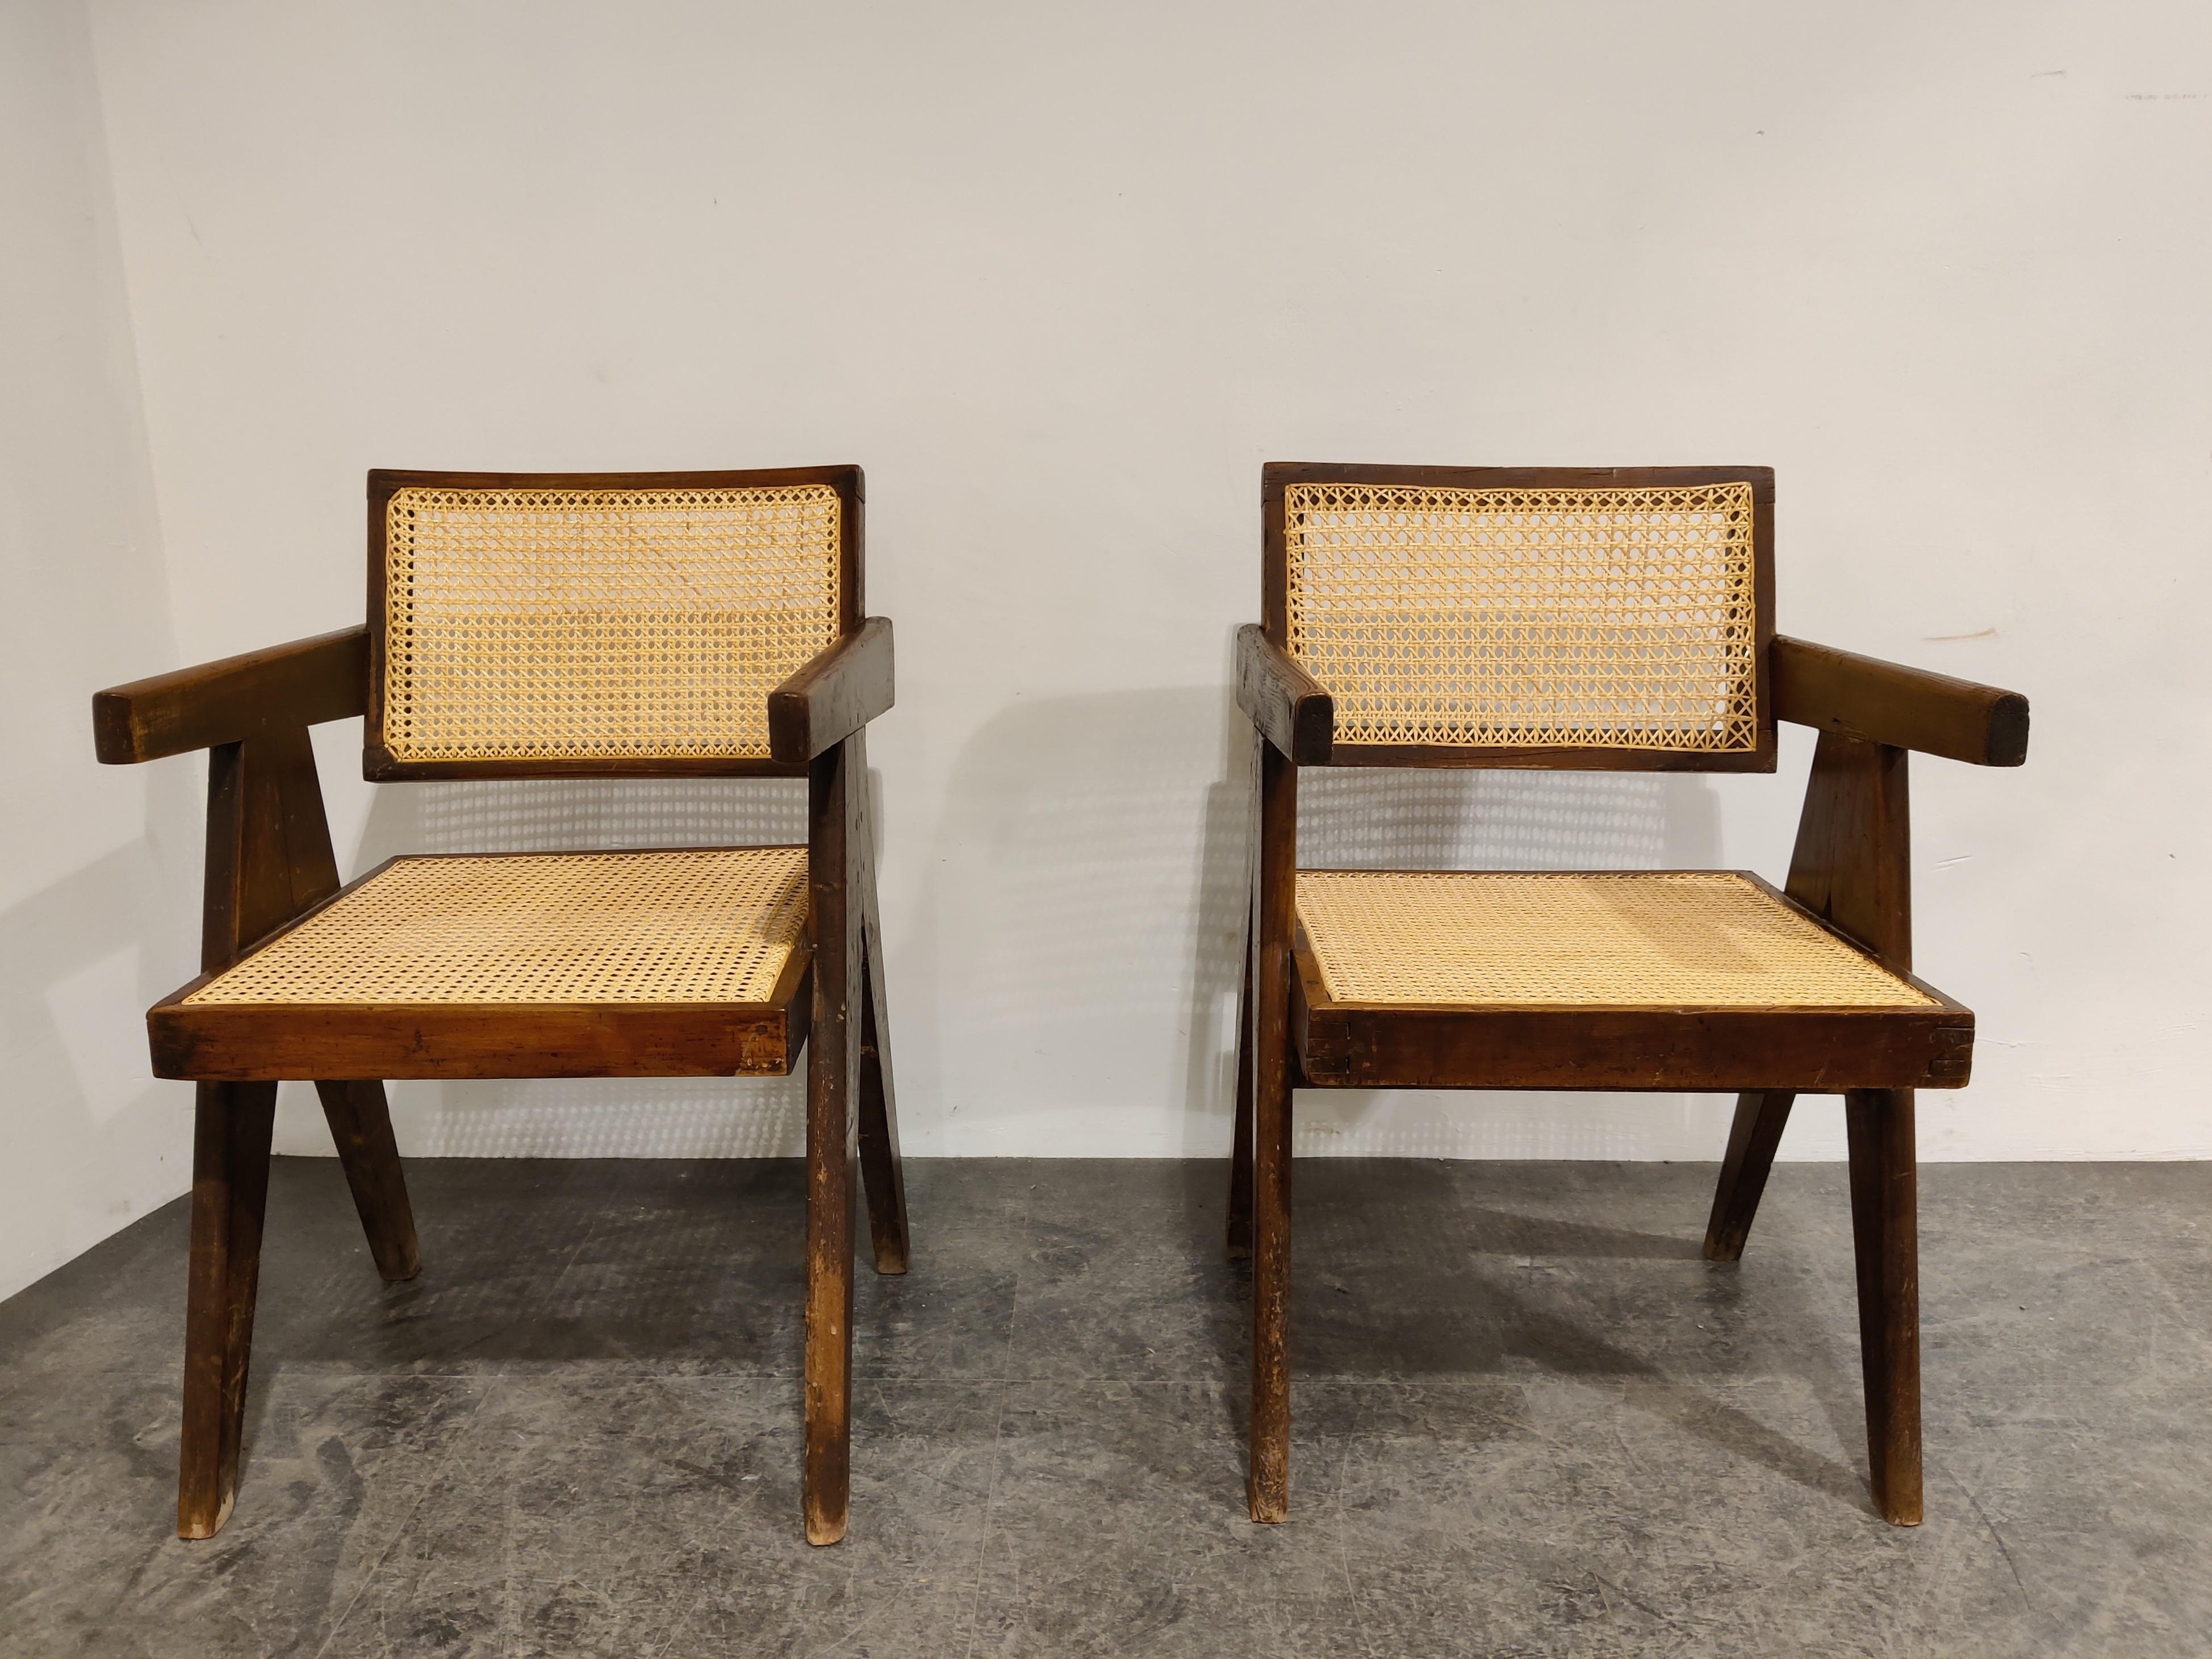 Pair of authentic mid century desk chairs designed by Pierre Jeanneret for the administrative buildings in Chandigarh.

They are historical pieces from an UNESCO World Heritage site, done by the most important architects from the 20th